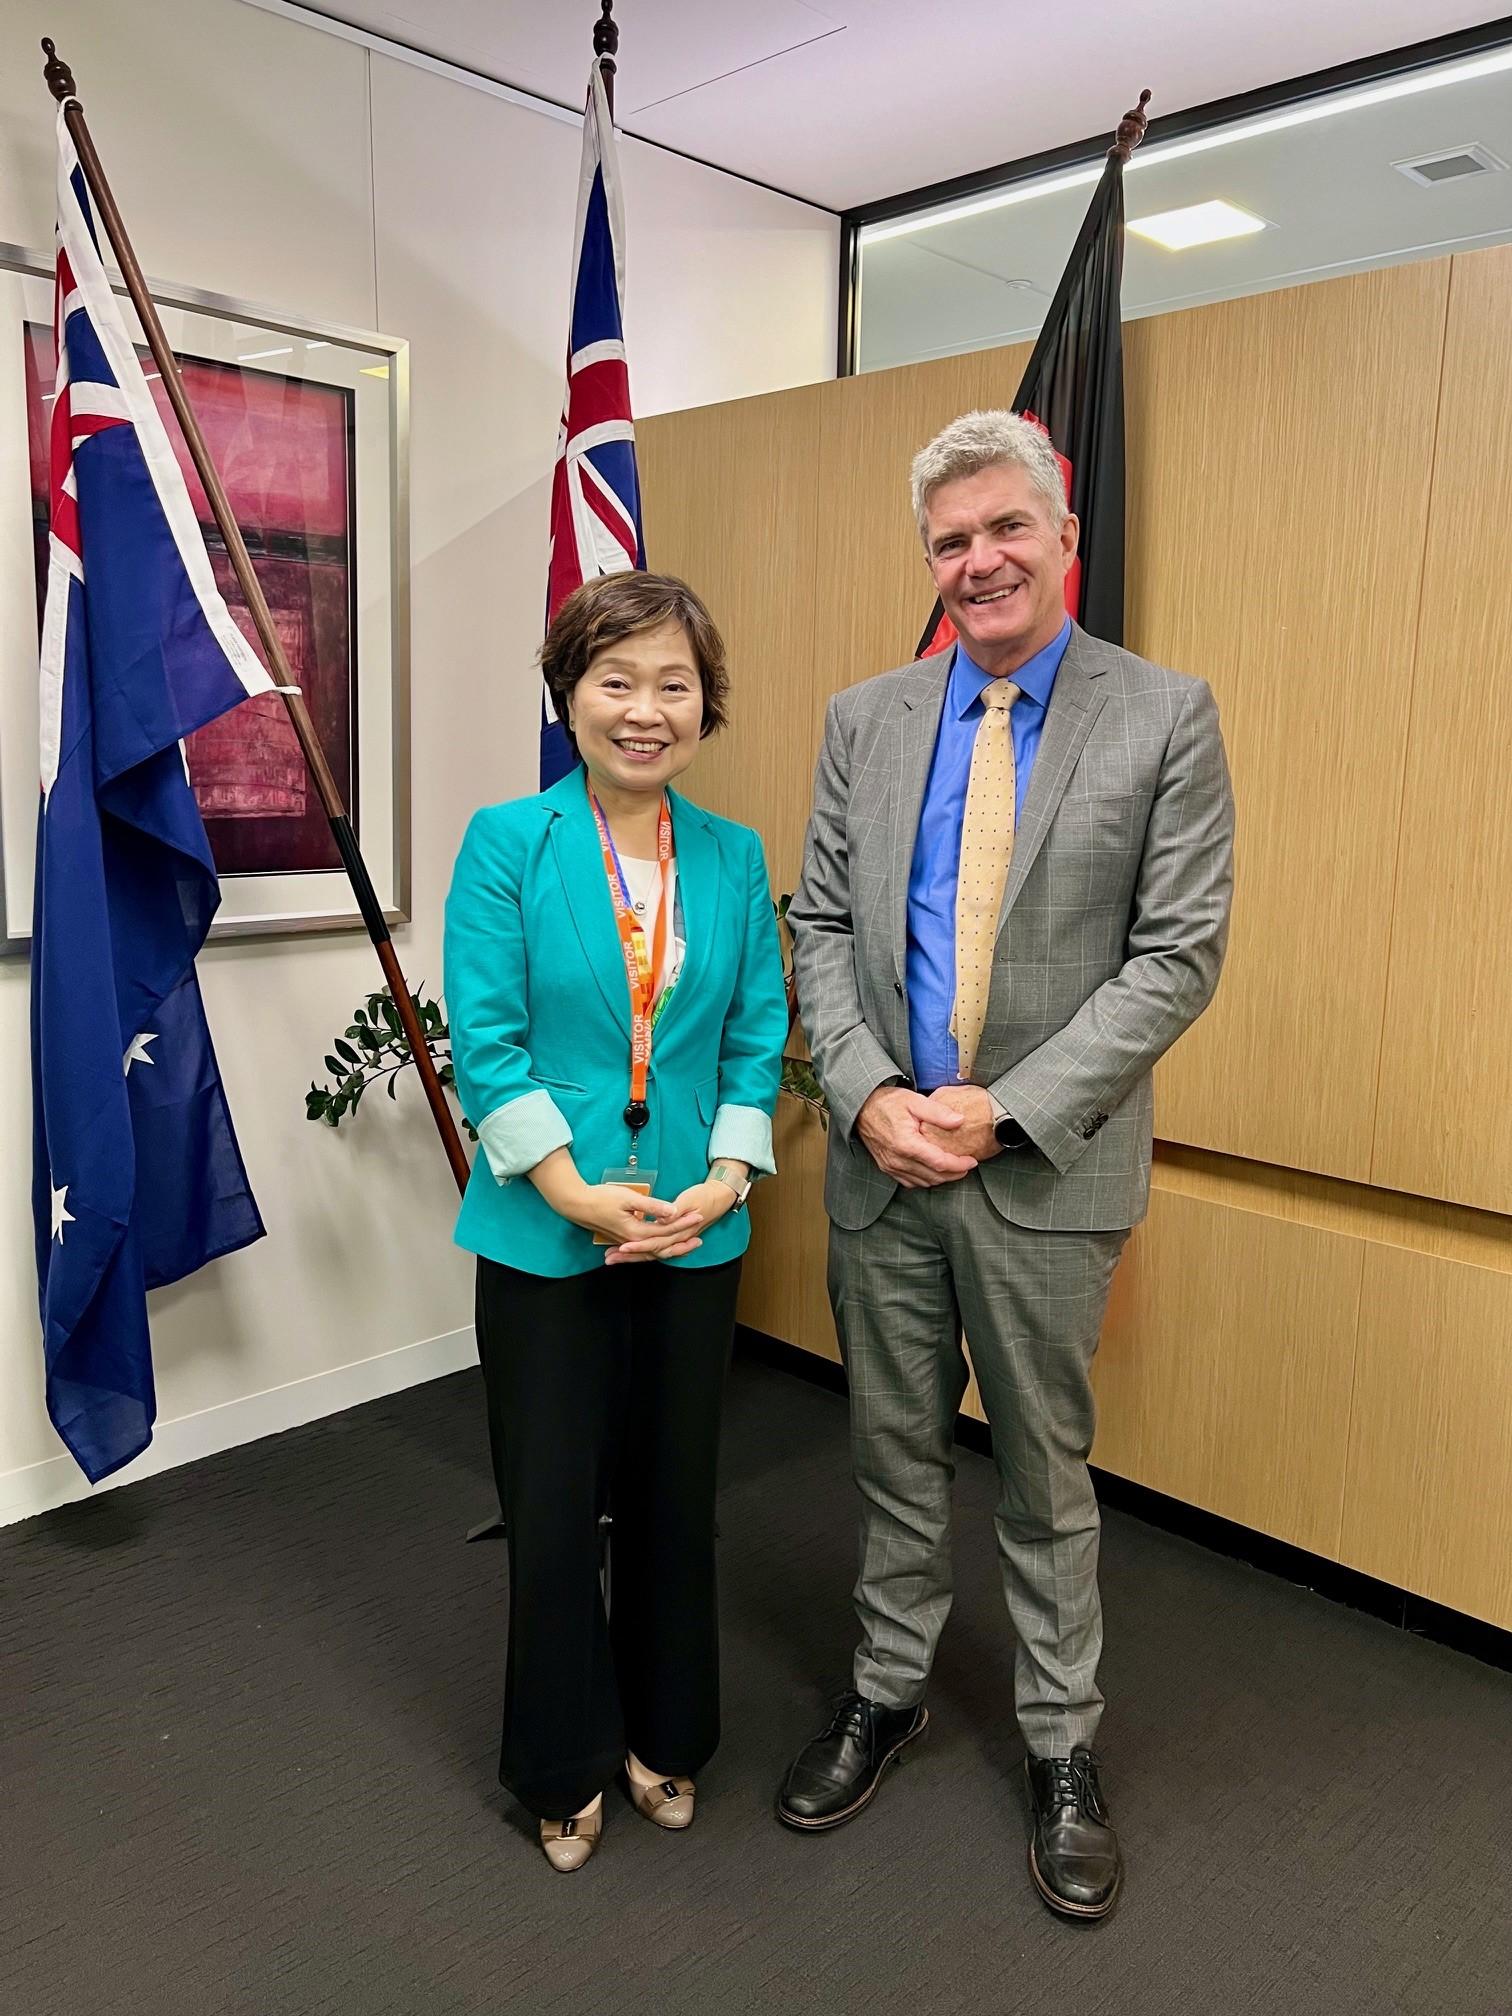 The Secretary for Education, Dr Choi Yuk-lin (left), met the Minister for Skills, TAFE and Tertiary Education of New South Wales, Mr Steve Whan (right), in Sydney, Australia, on March 4 (Sydney time).